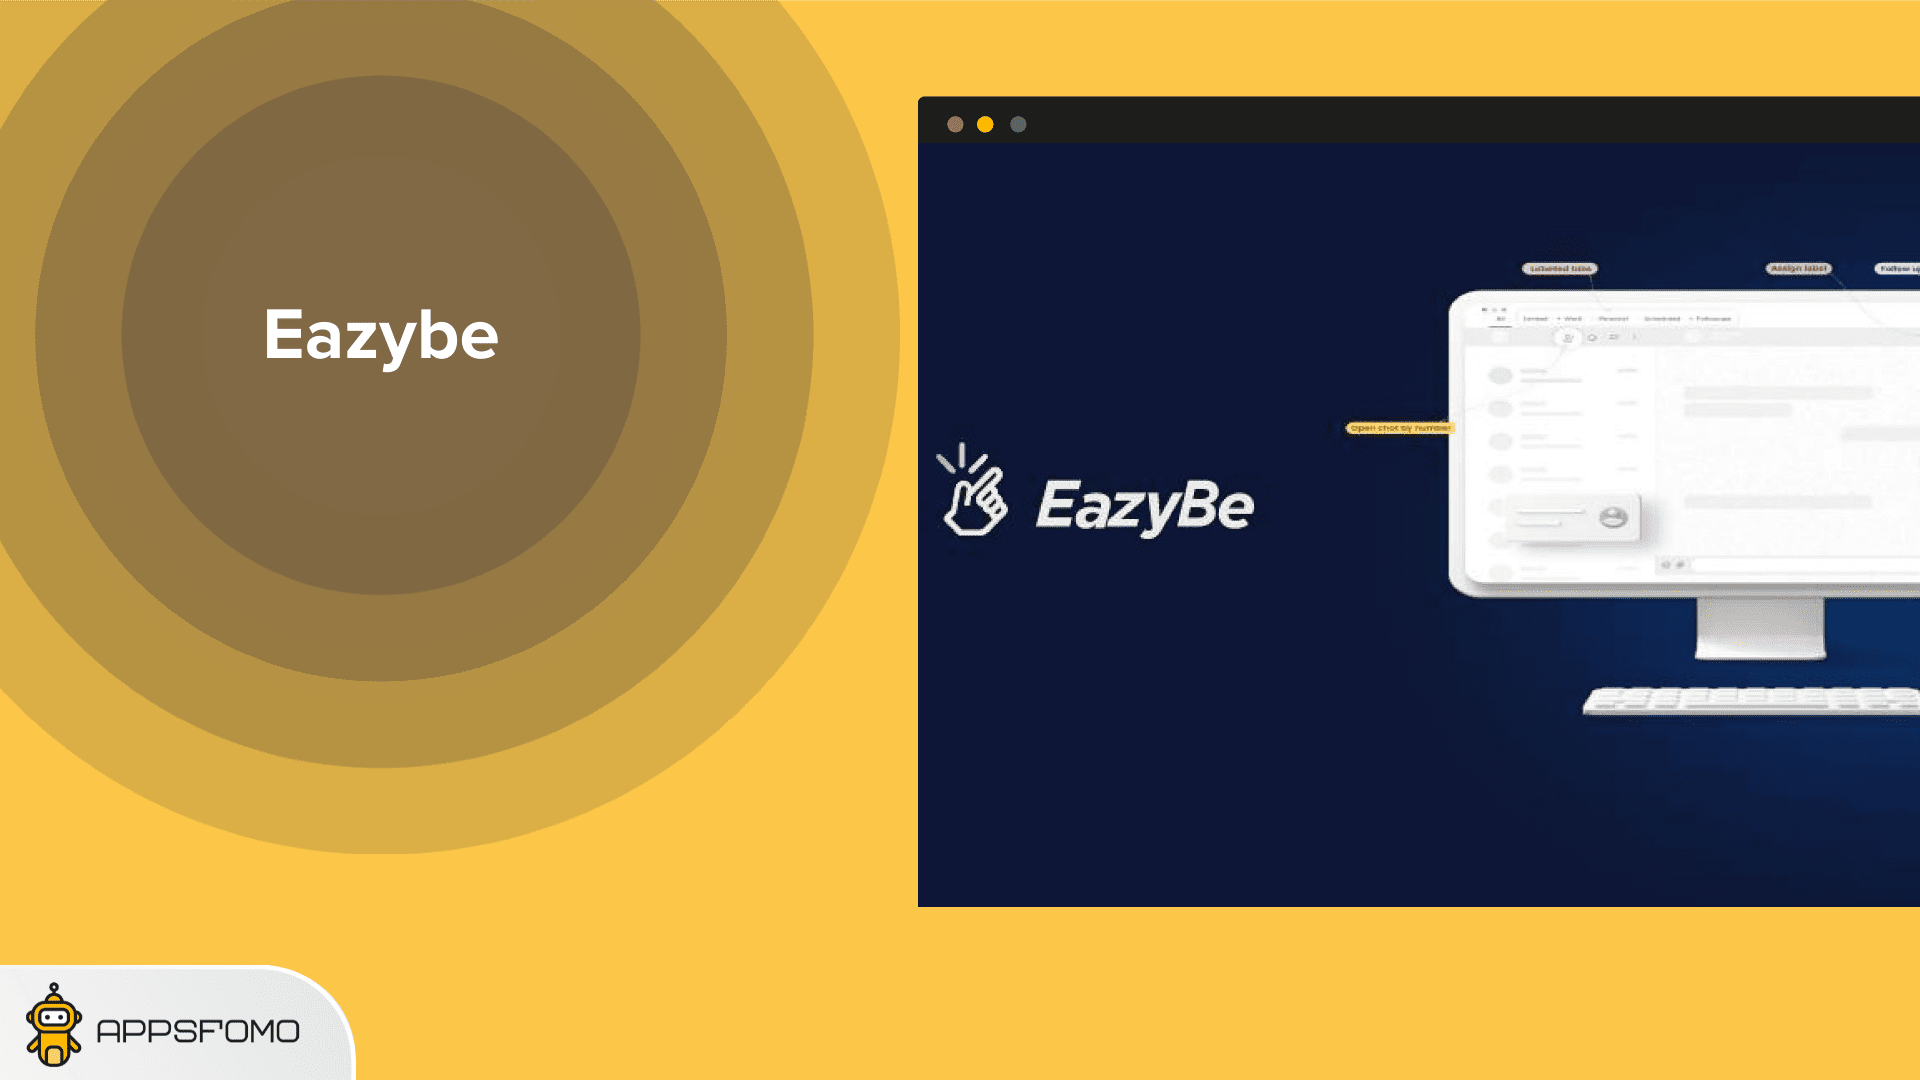 Eazybe